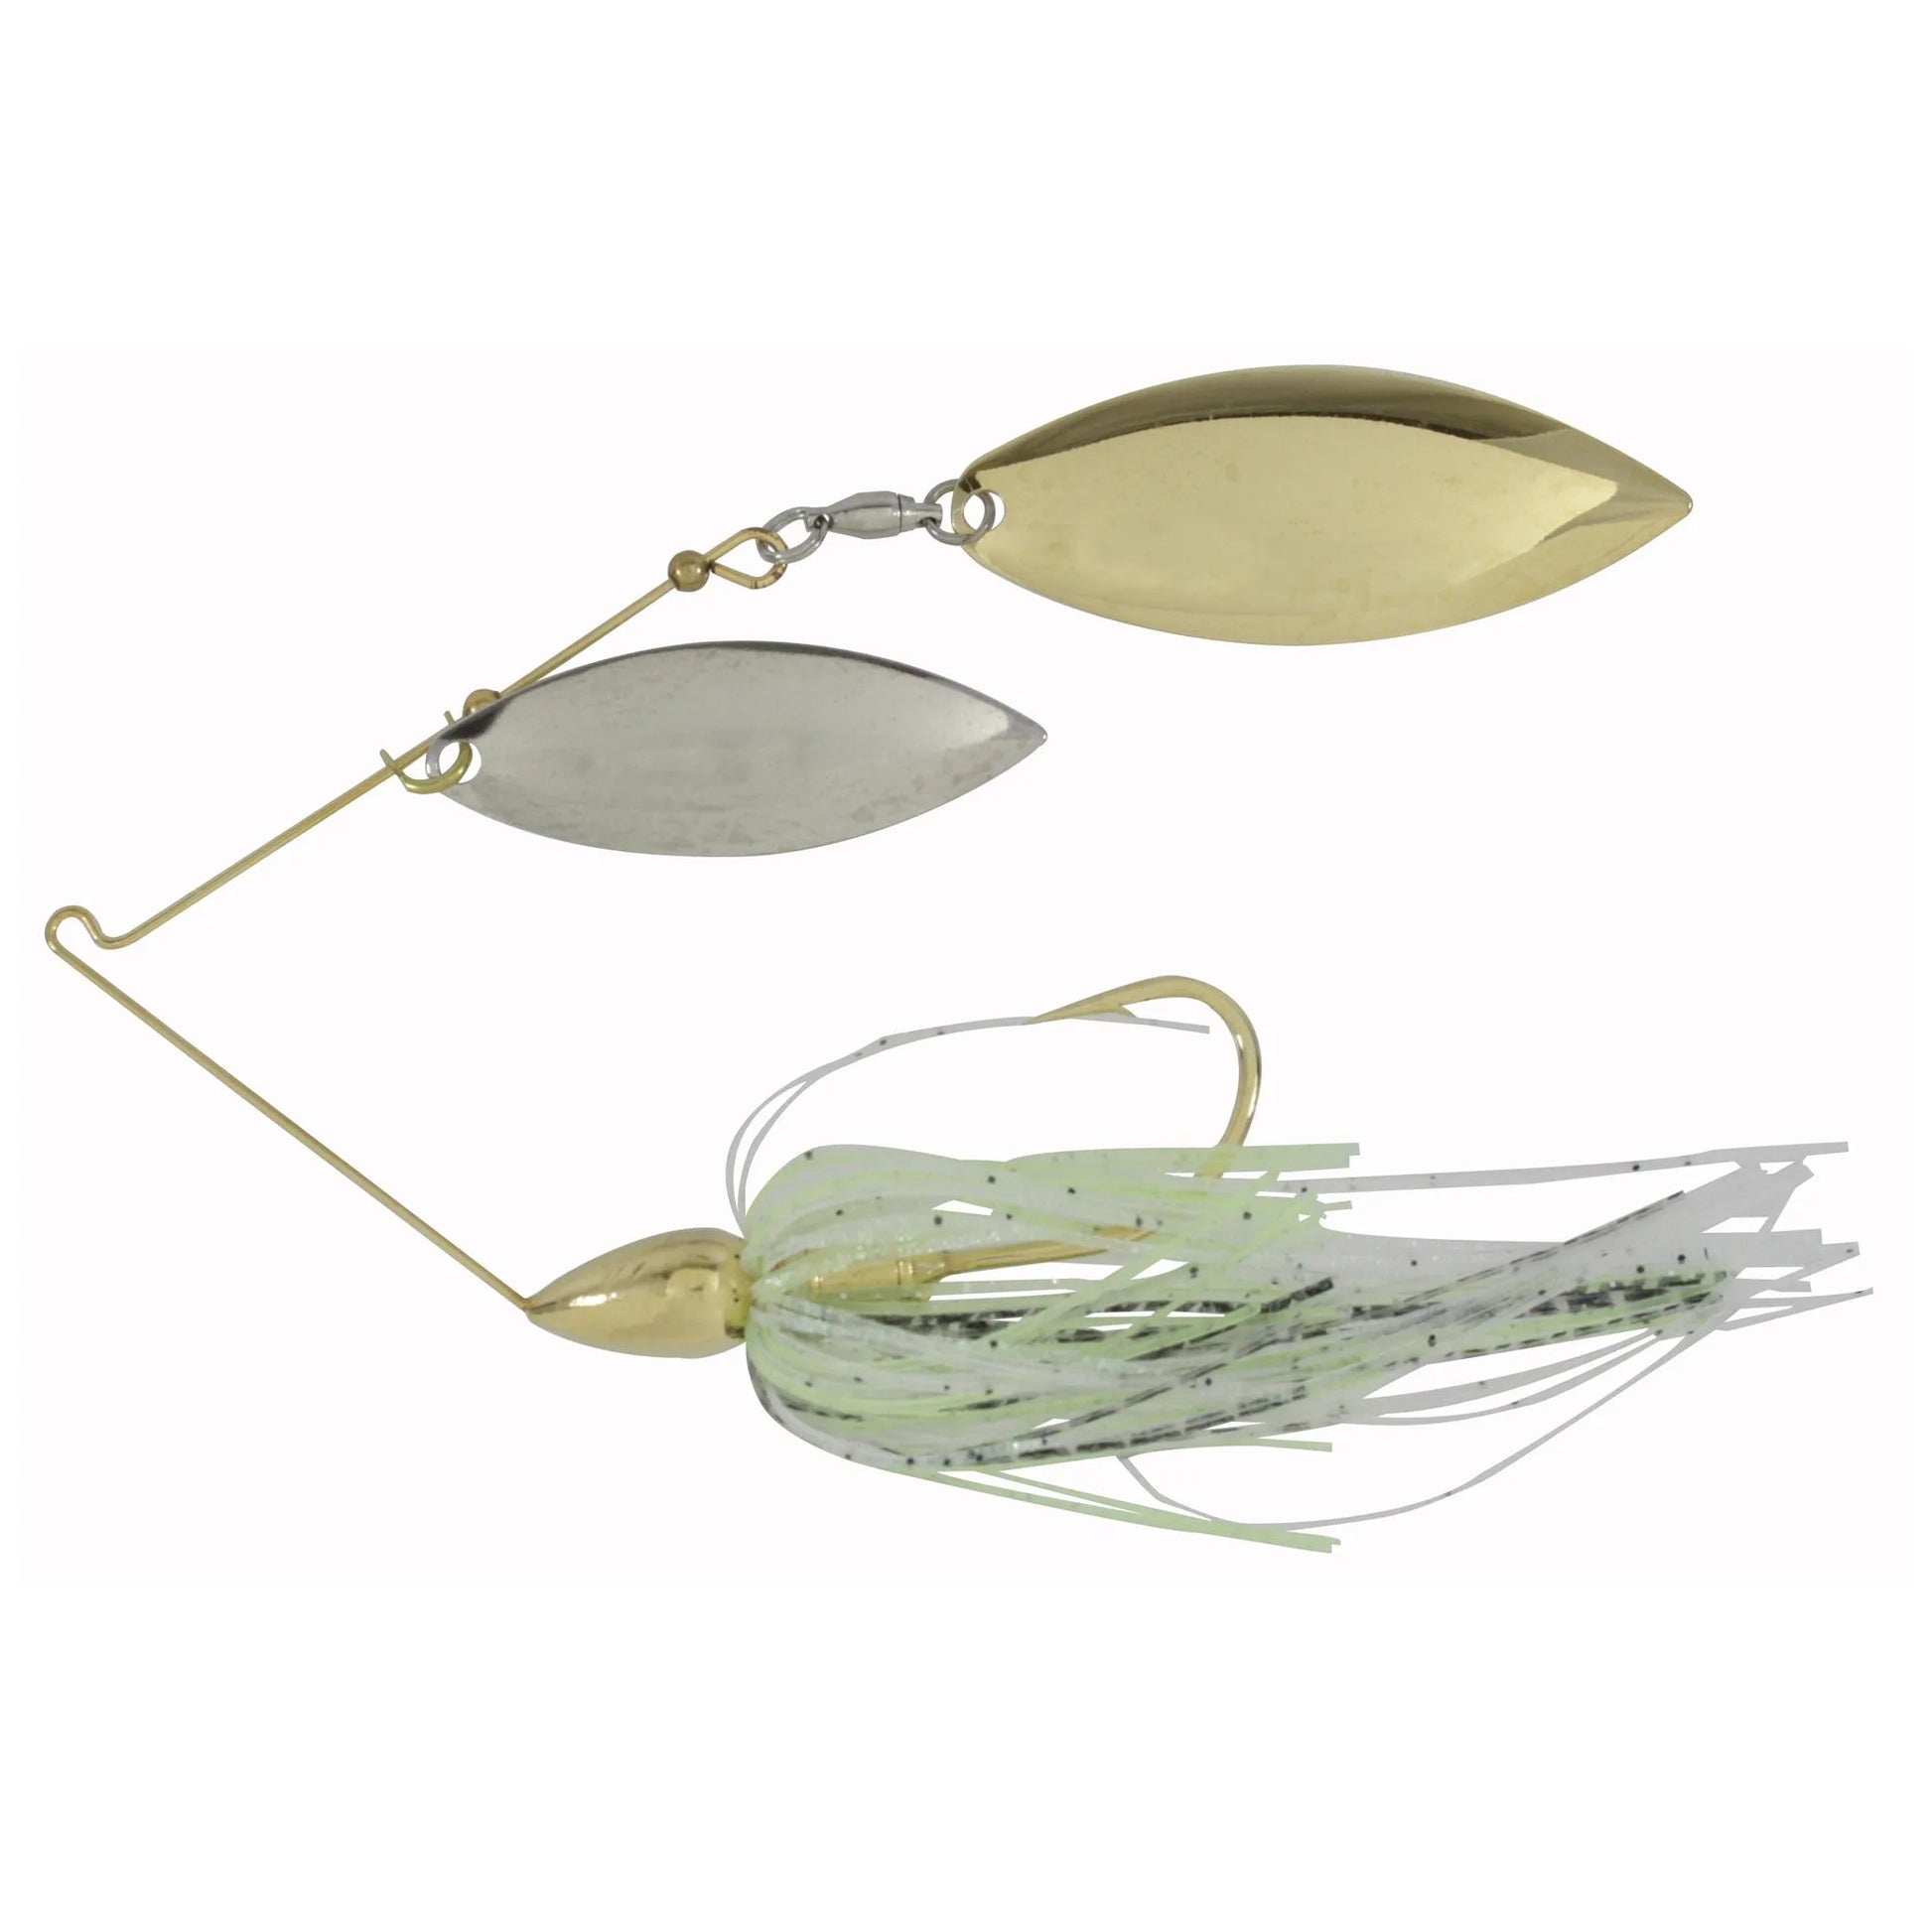 War Eagle Nickel Double Willow Spinnerbait 1/2 oz / Mouse